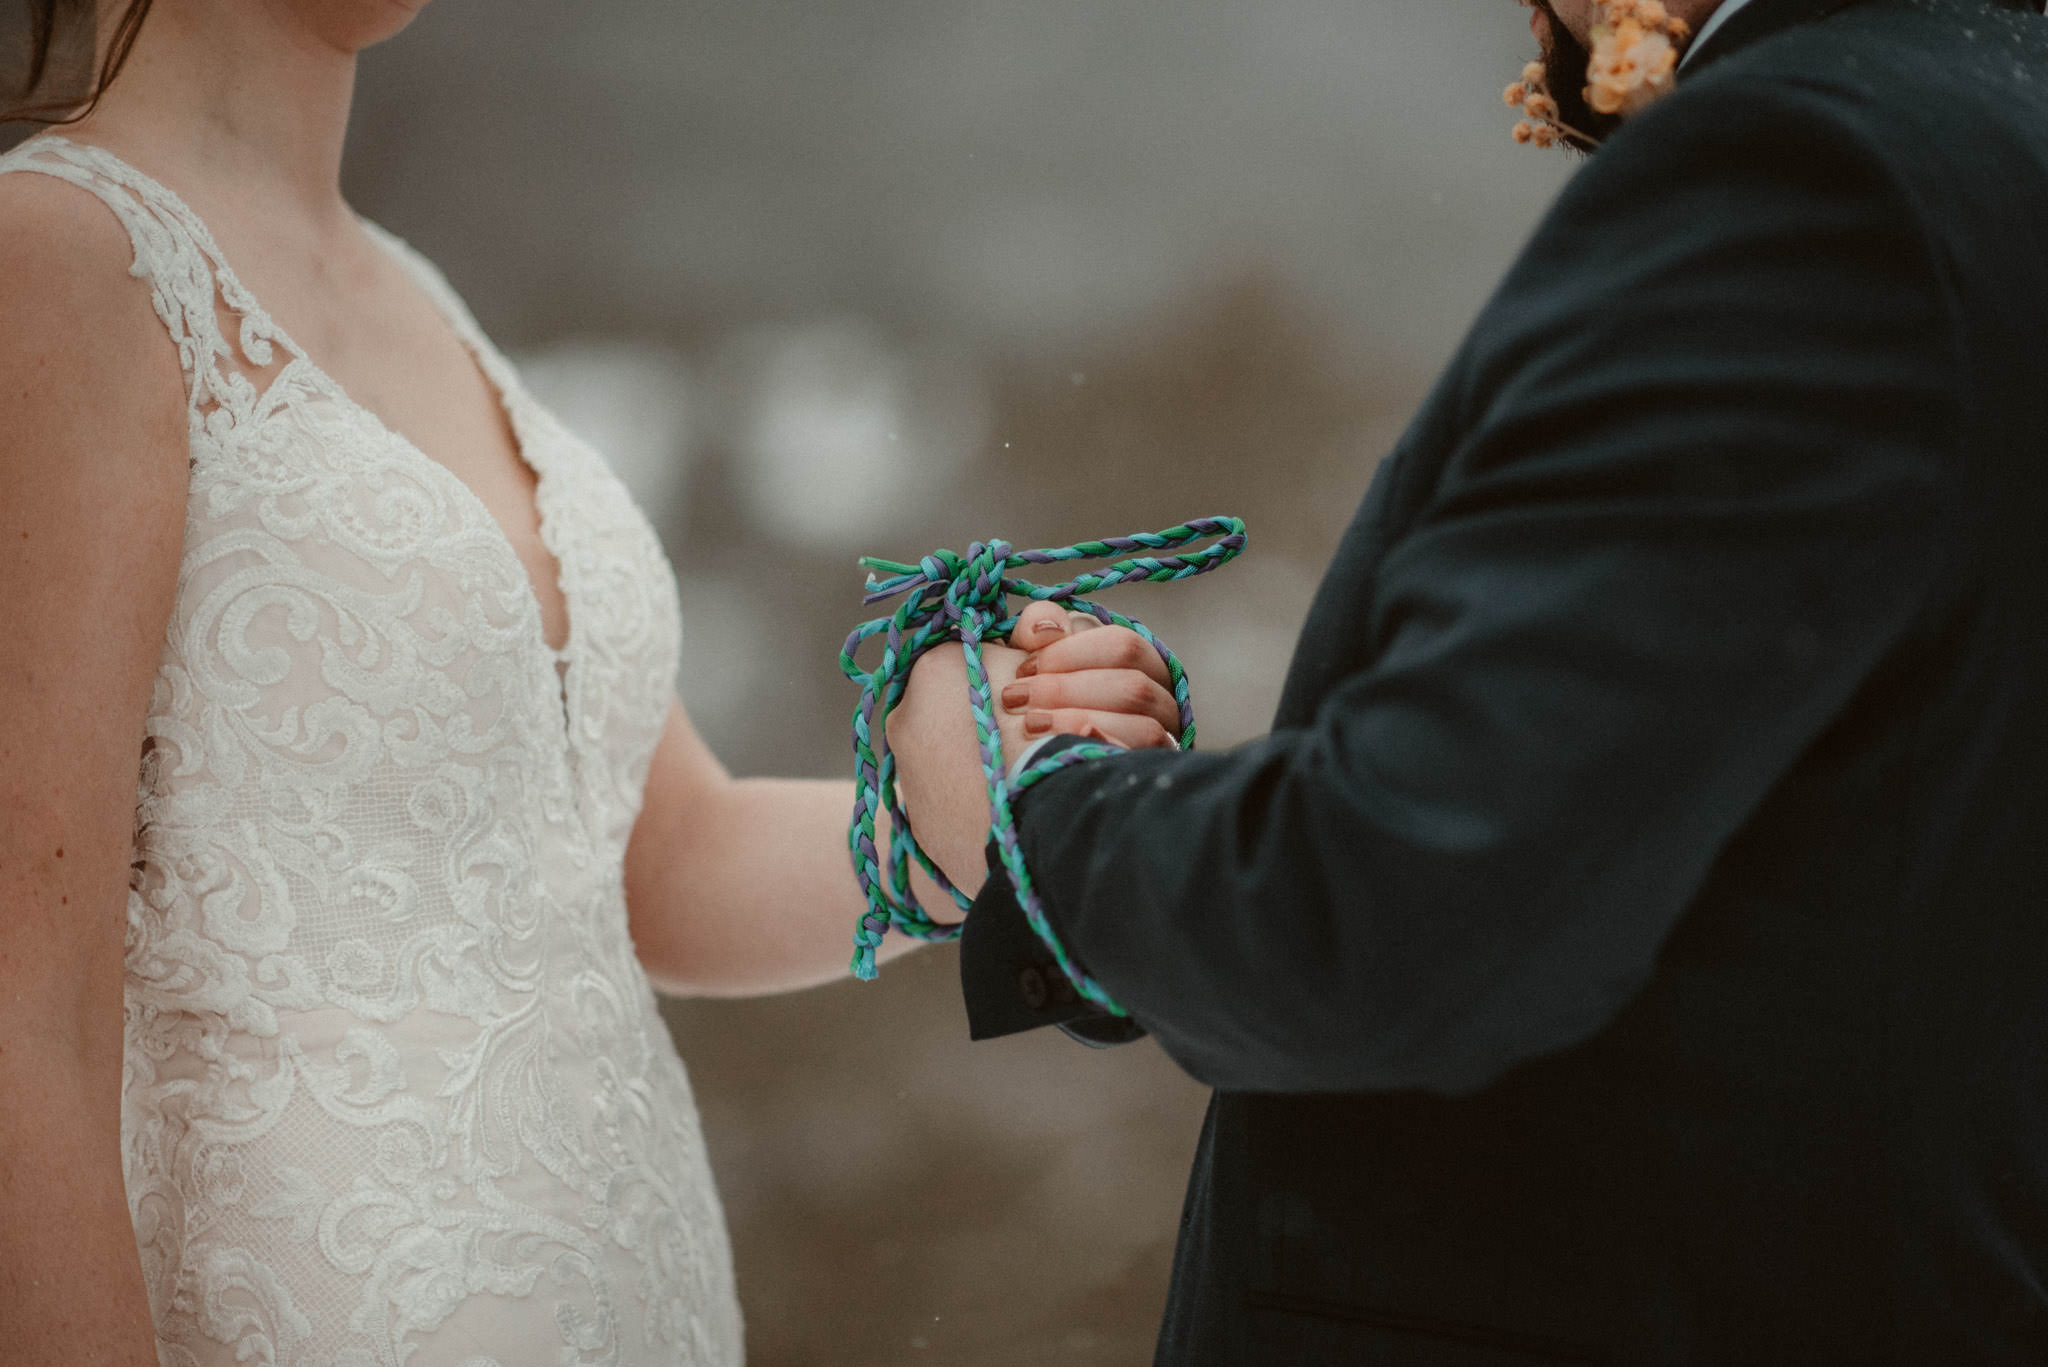 Handfasting ceremony at elopement on Sugarloaf Mountain in Marquette, MI